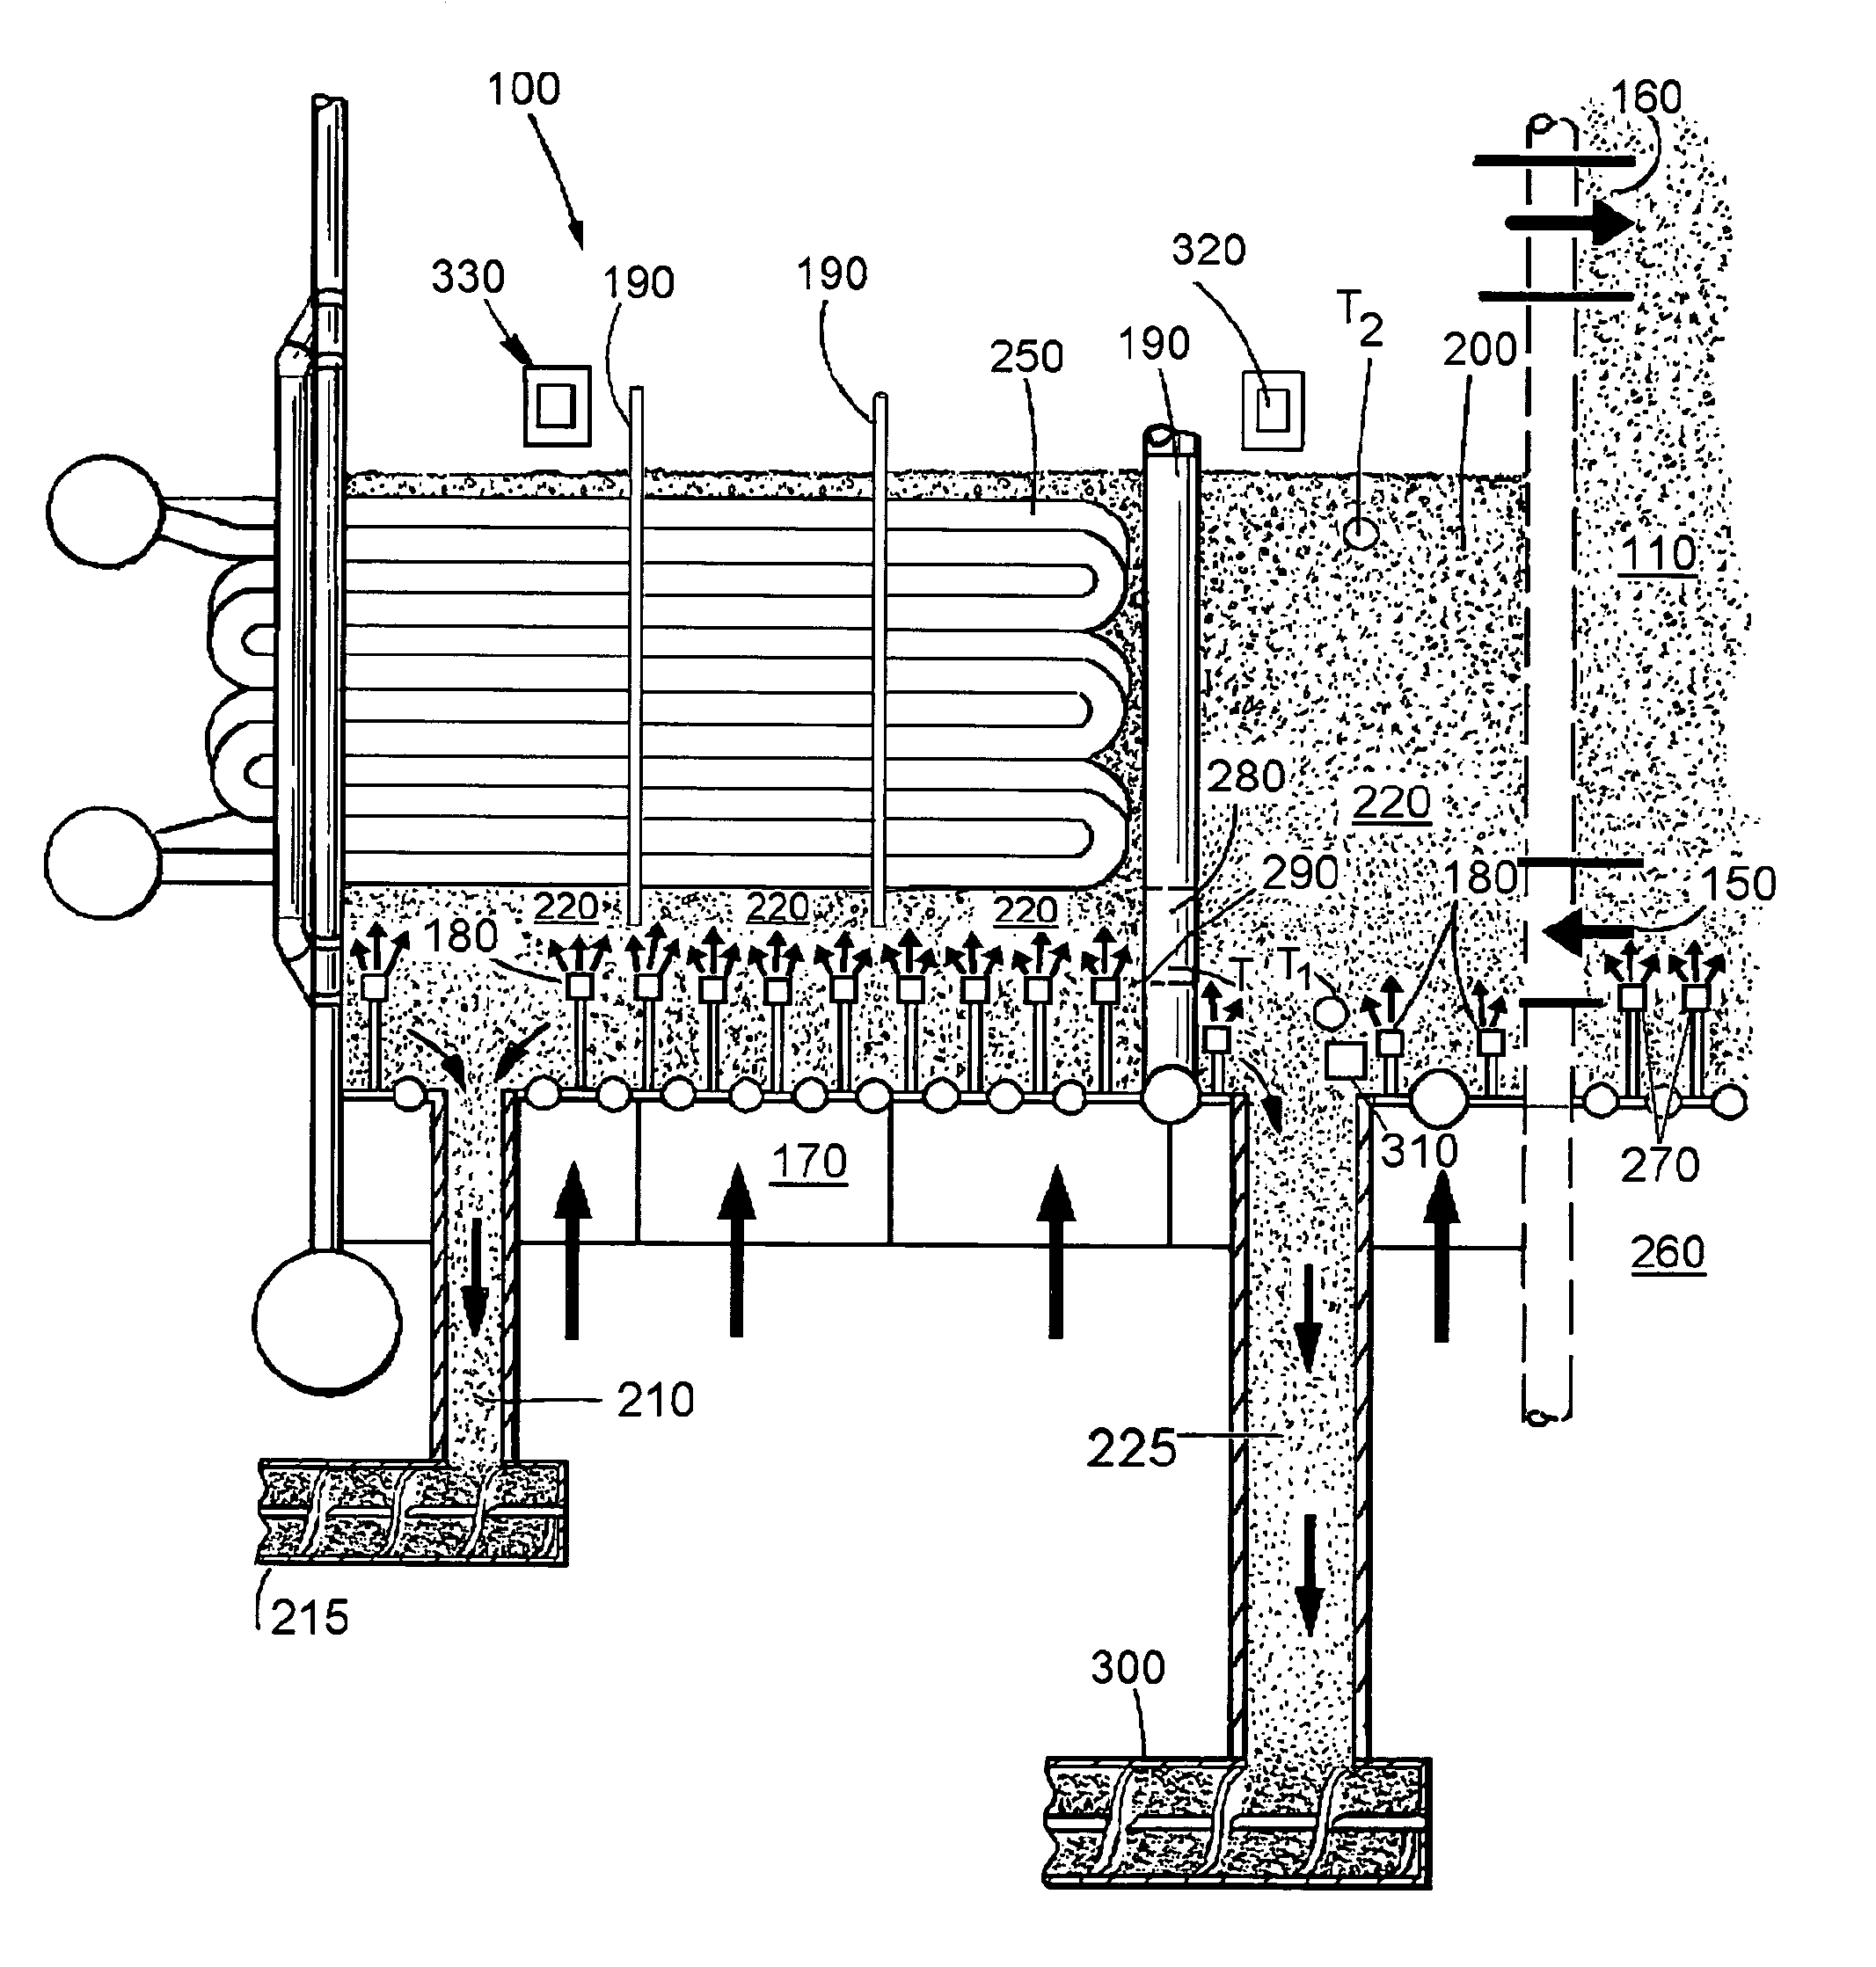 Integrated fluidized bed ash cooler